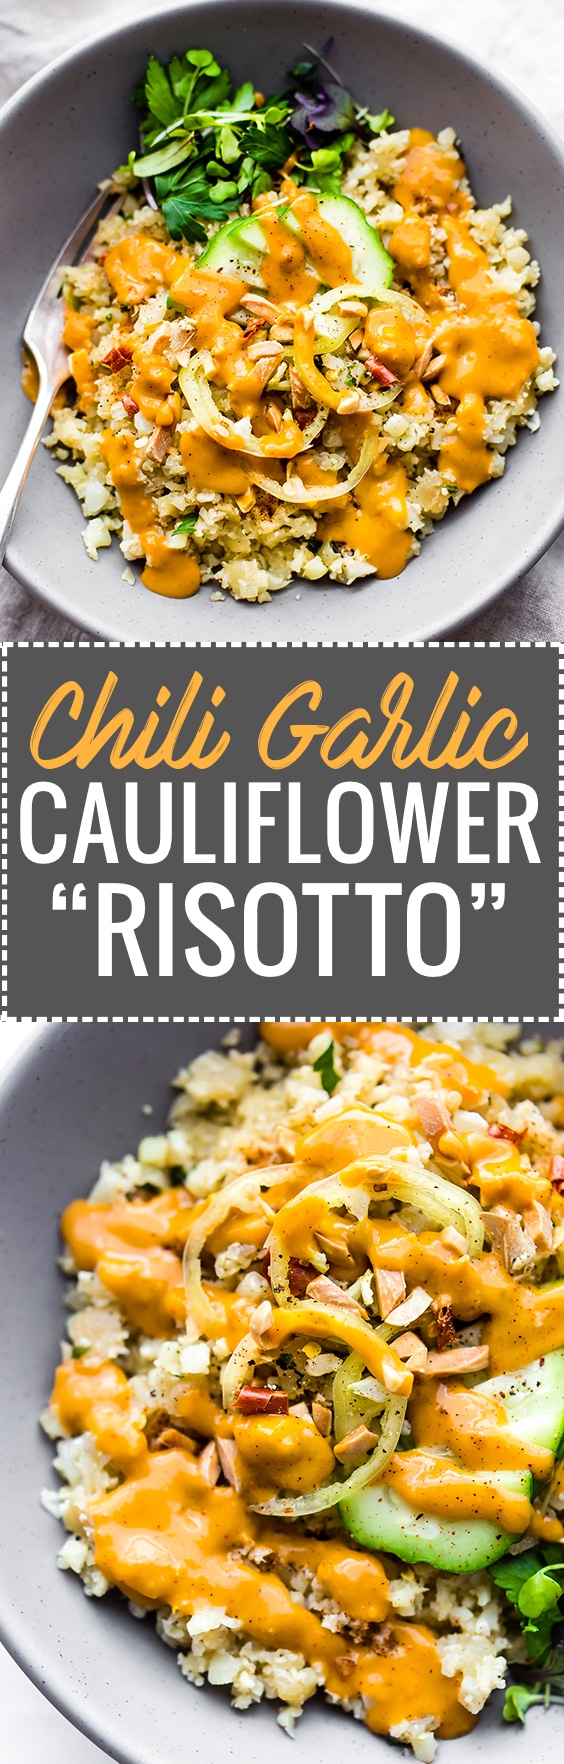 Two images chili garlic cauliflower risotto served in bowls topped with orange sauce